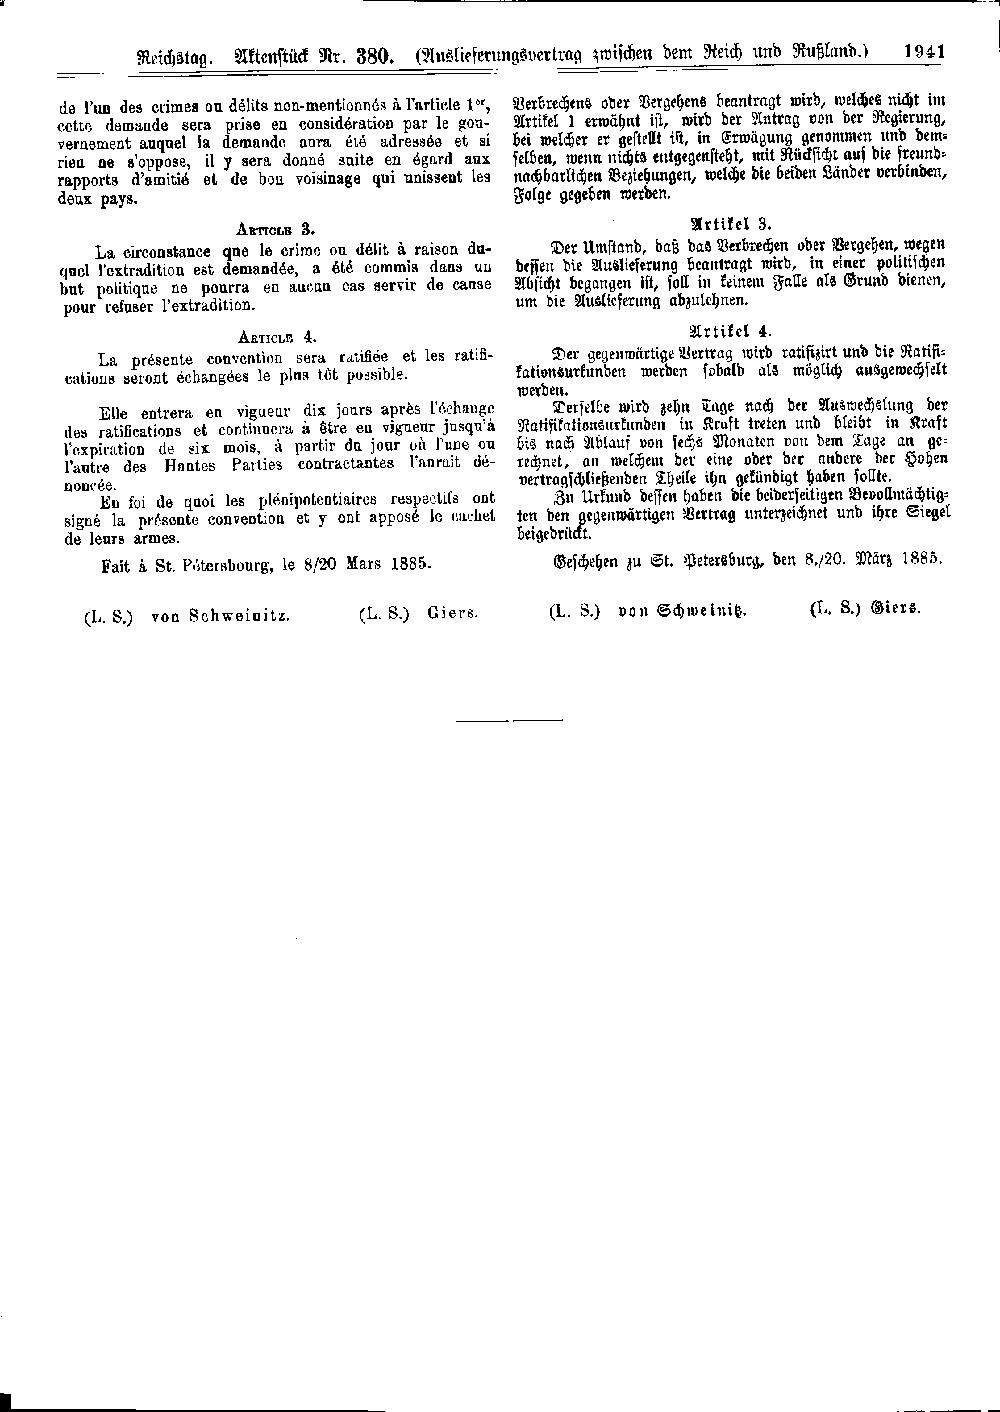 Scan of page 1941